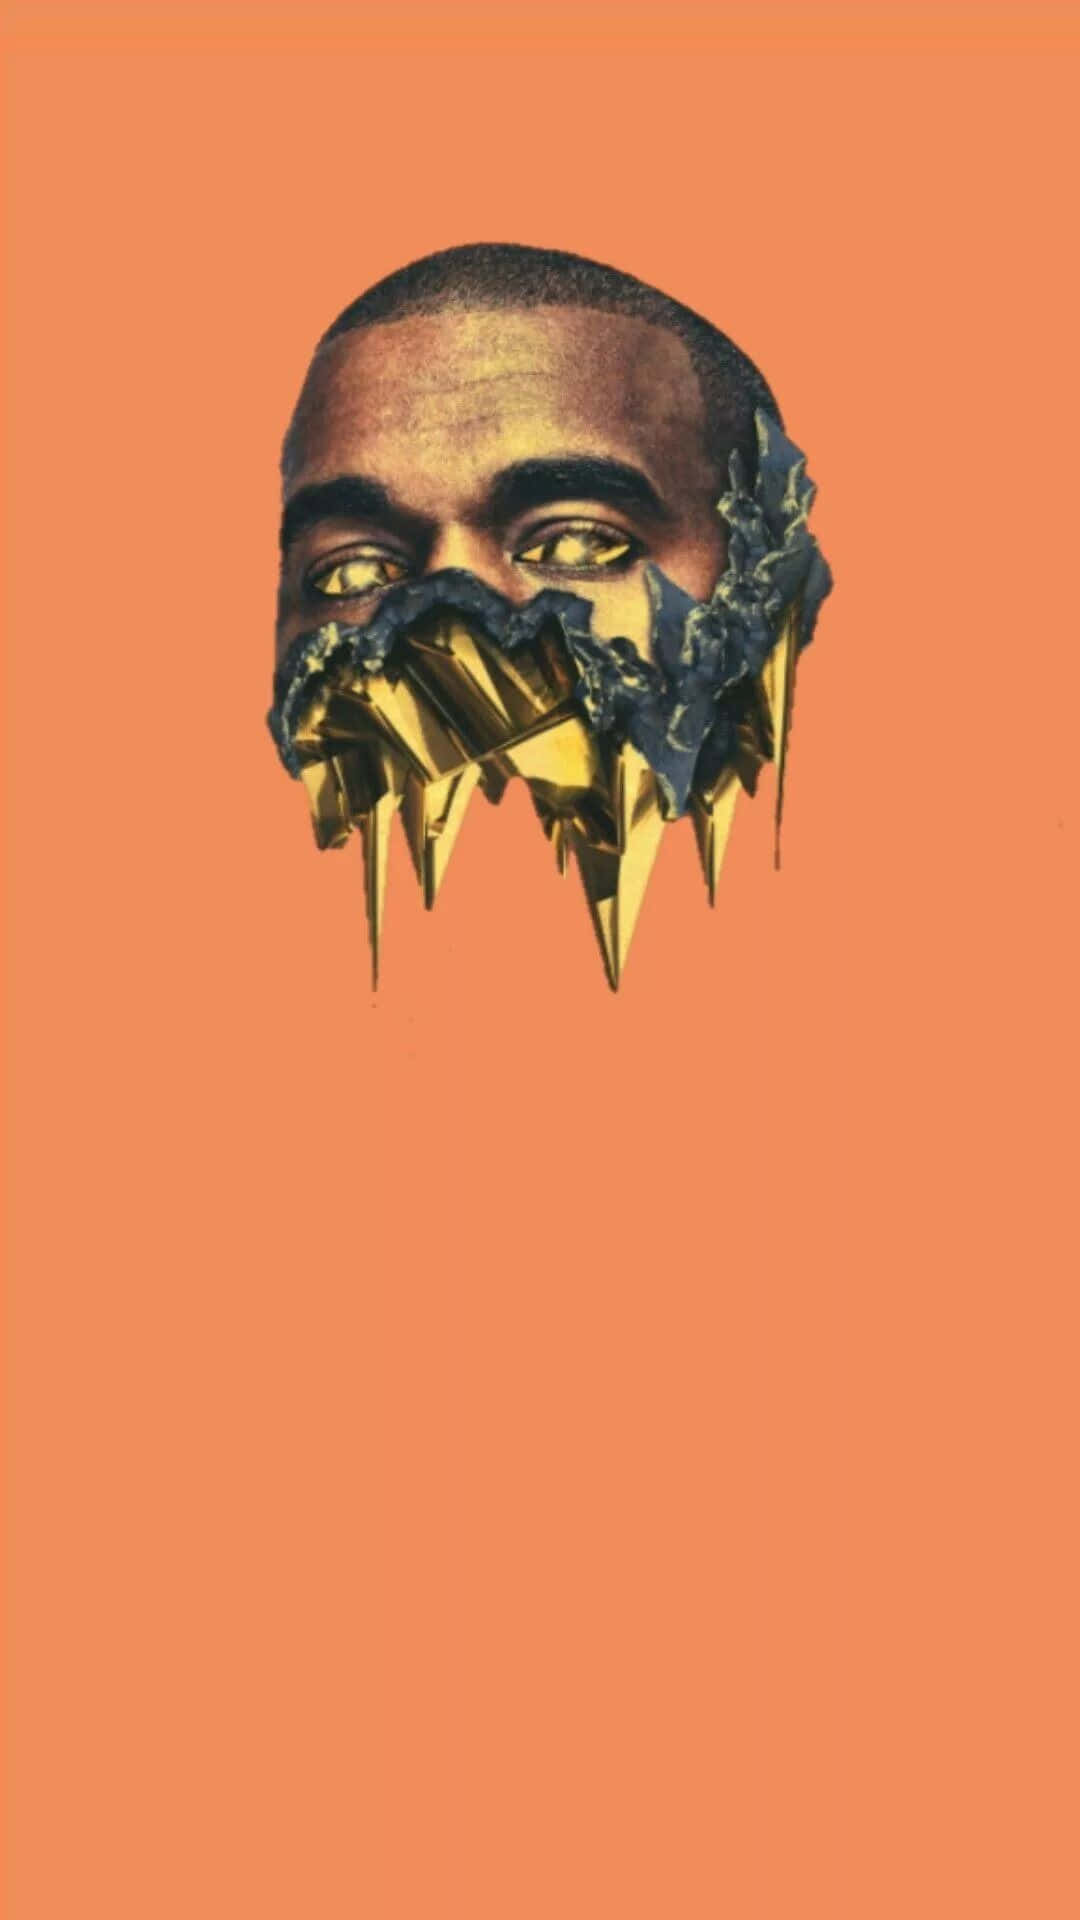 Your Style Elevated with the Kanye West iPhone Wallpaper